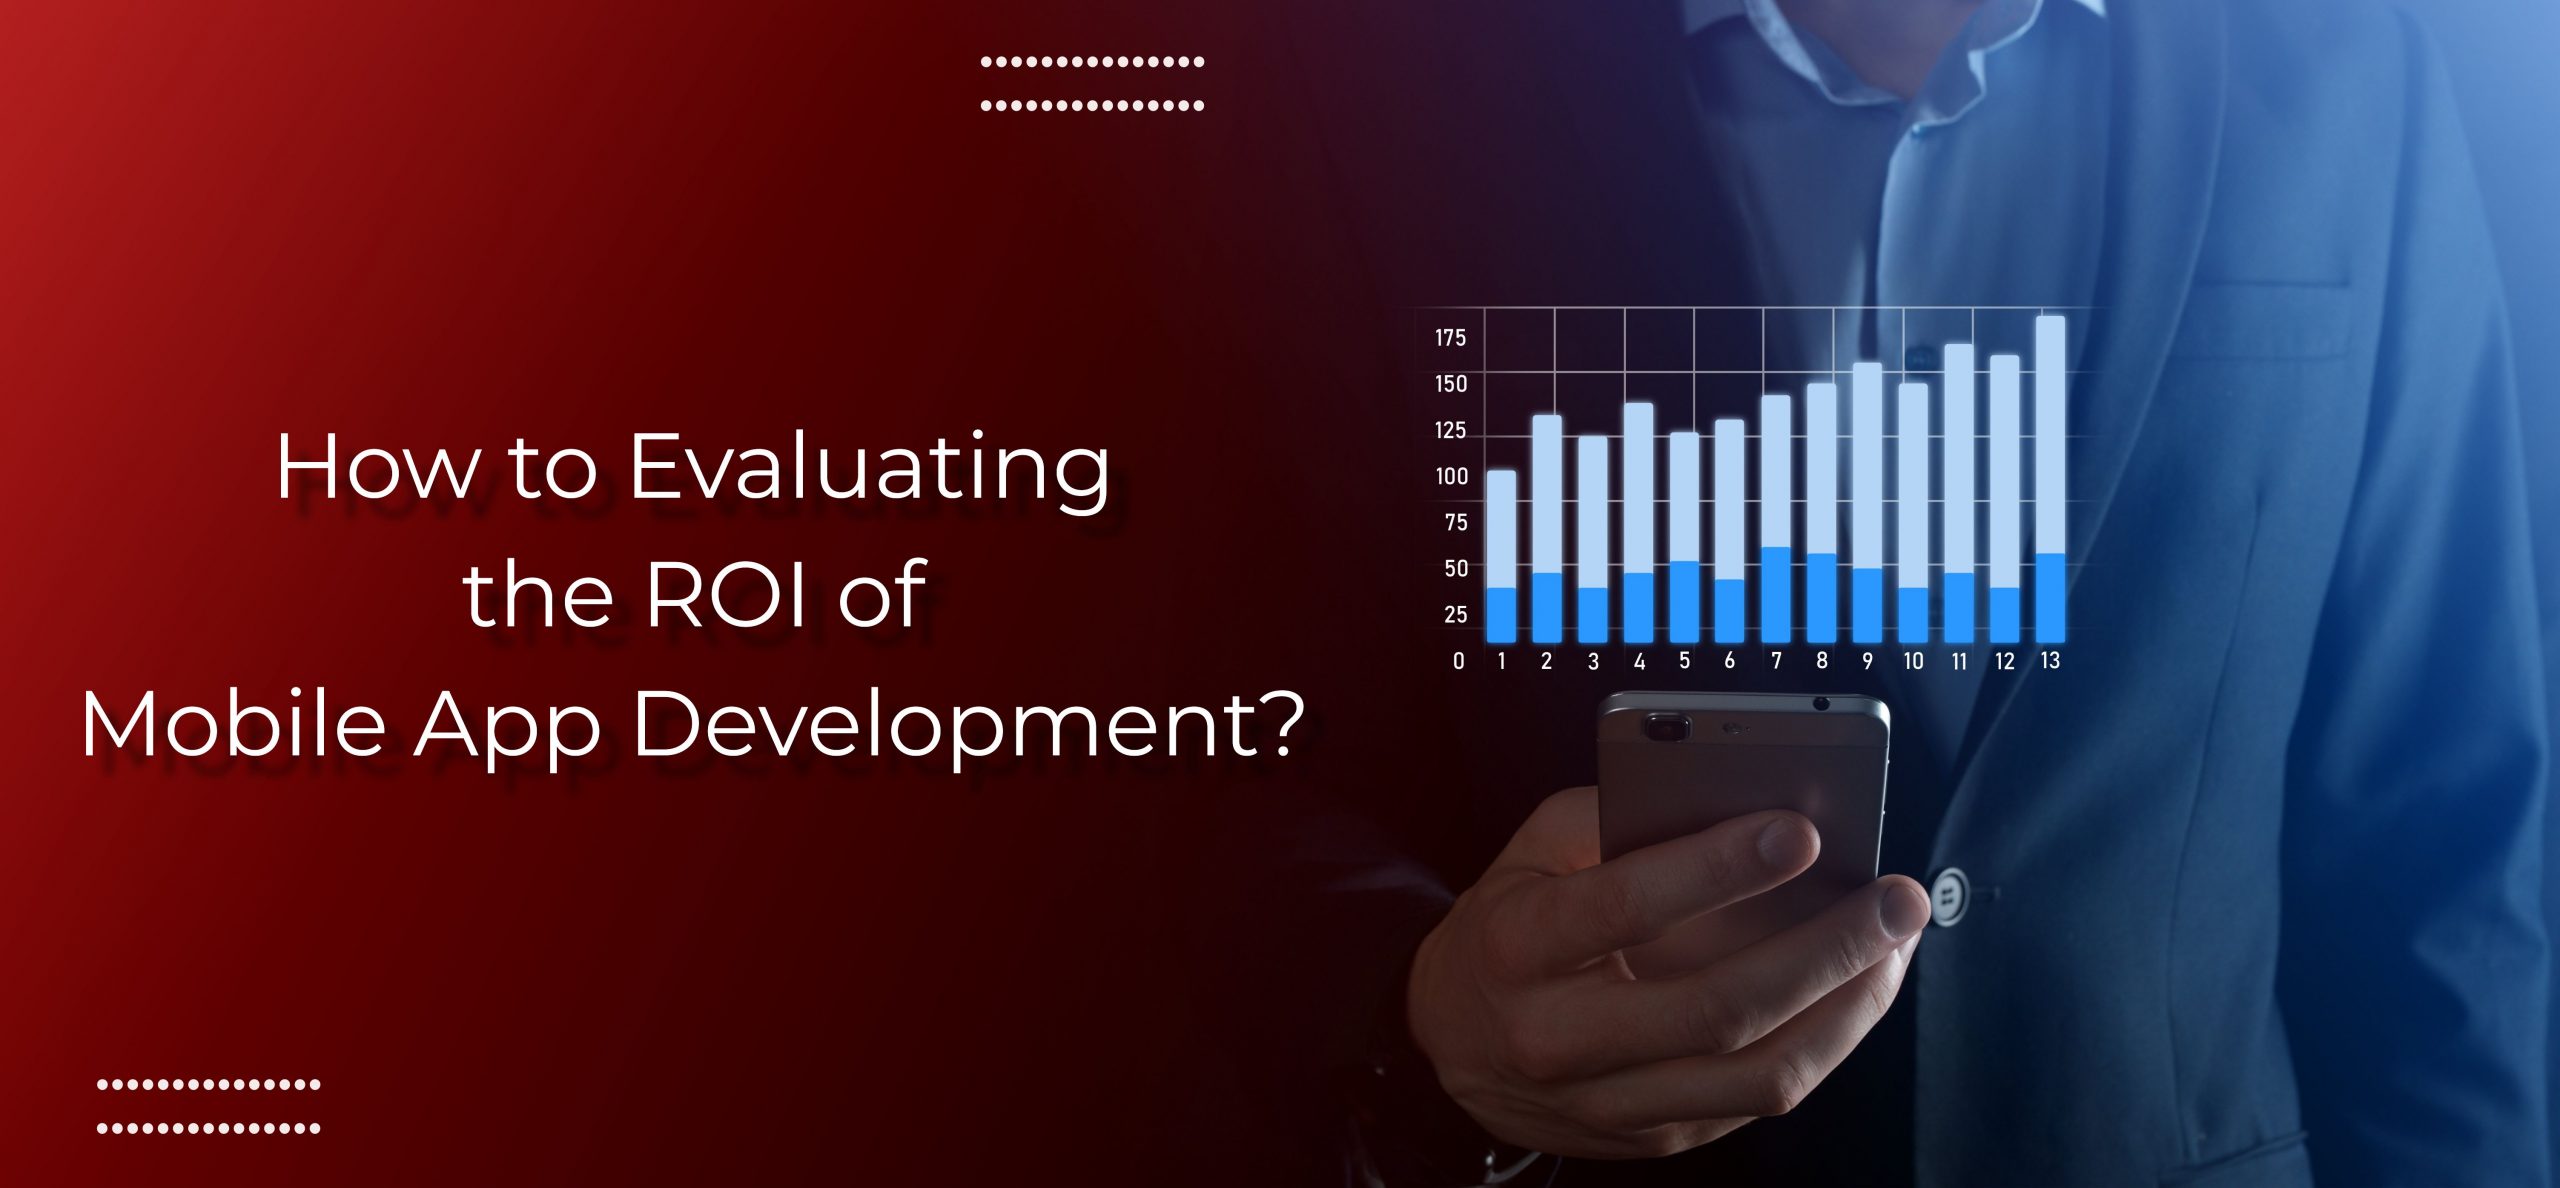 <strong>Evaluating the ROI of Mobile App Development: Key Matrics to Track and Analyze</strong>